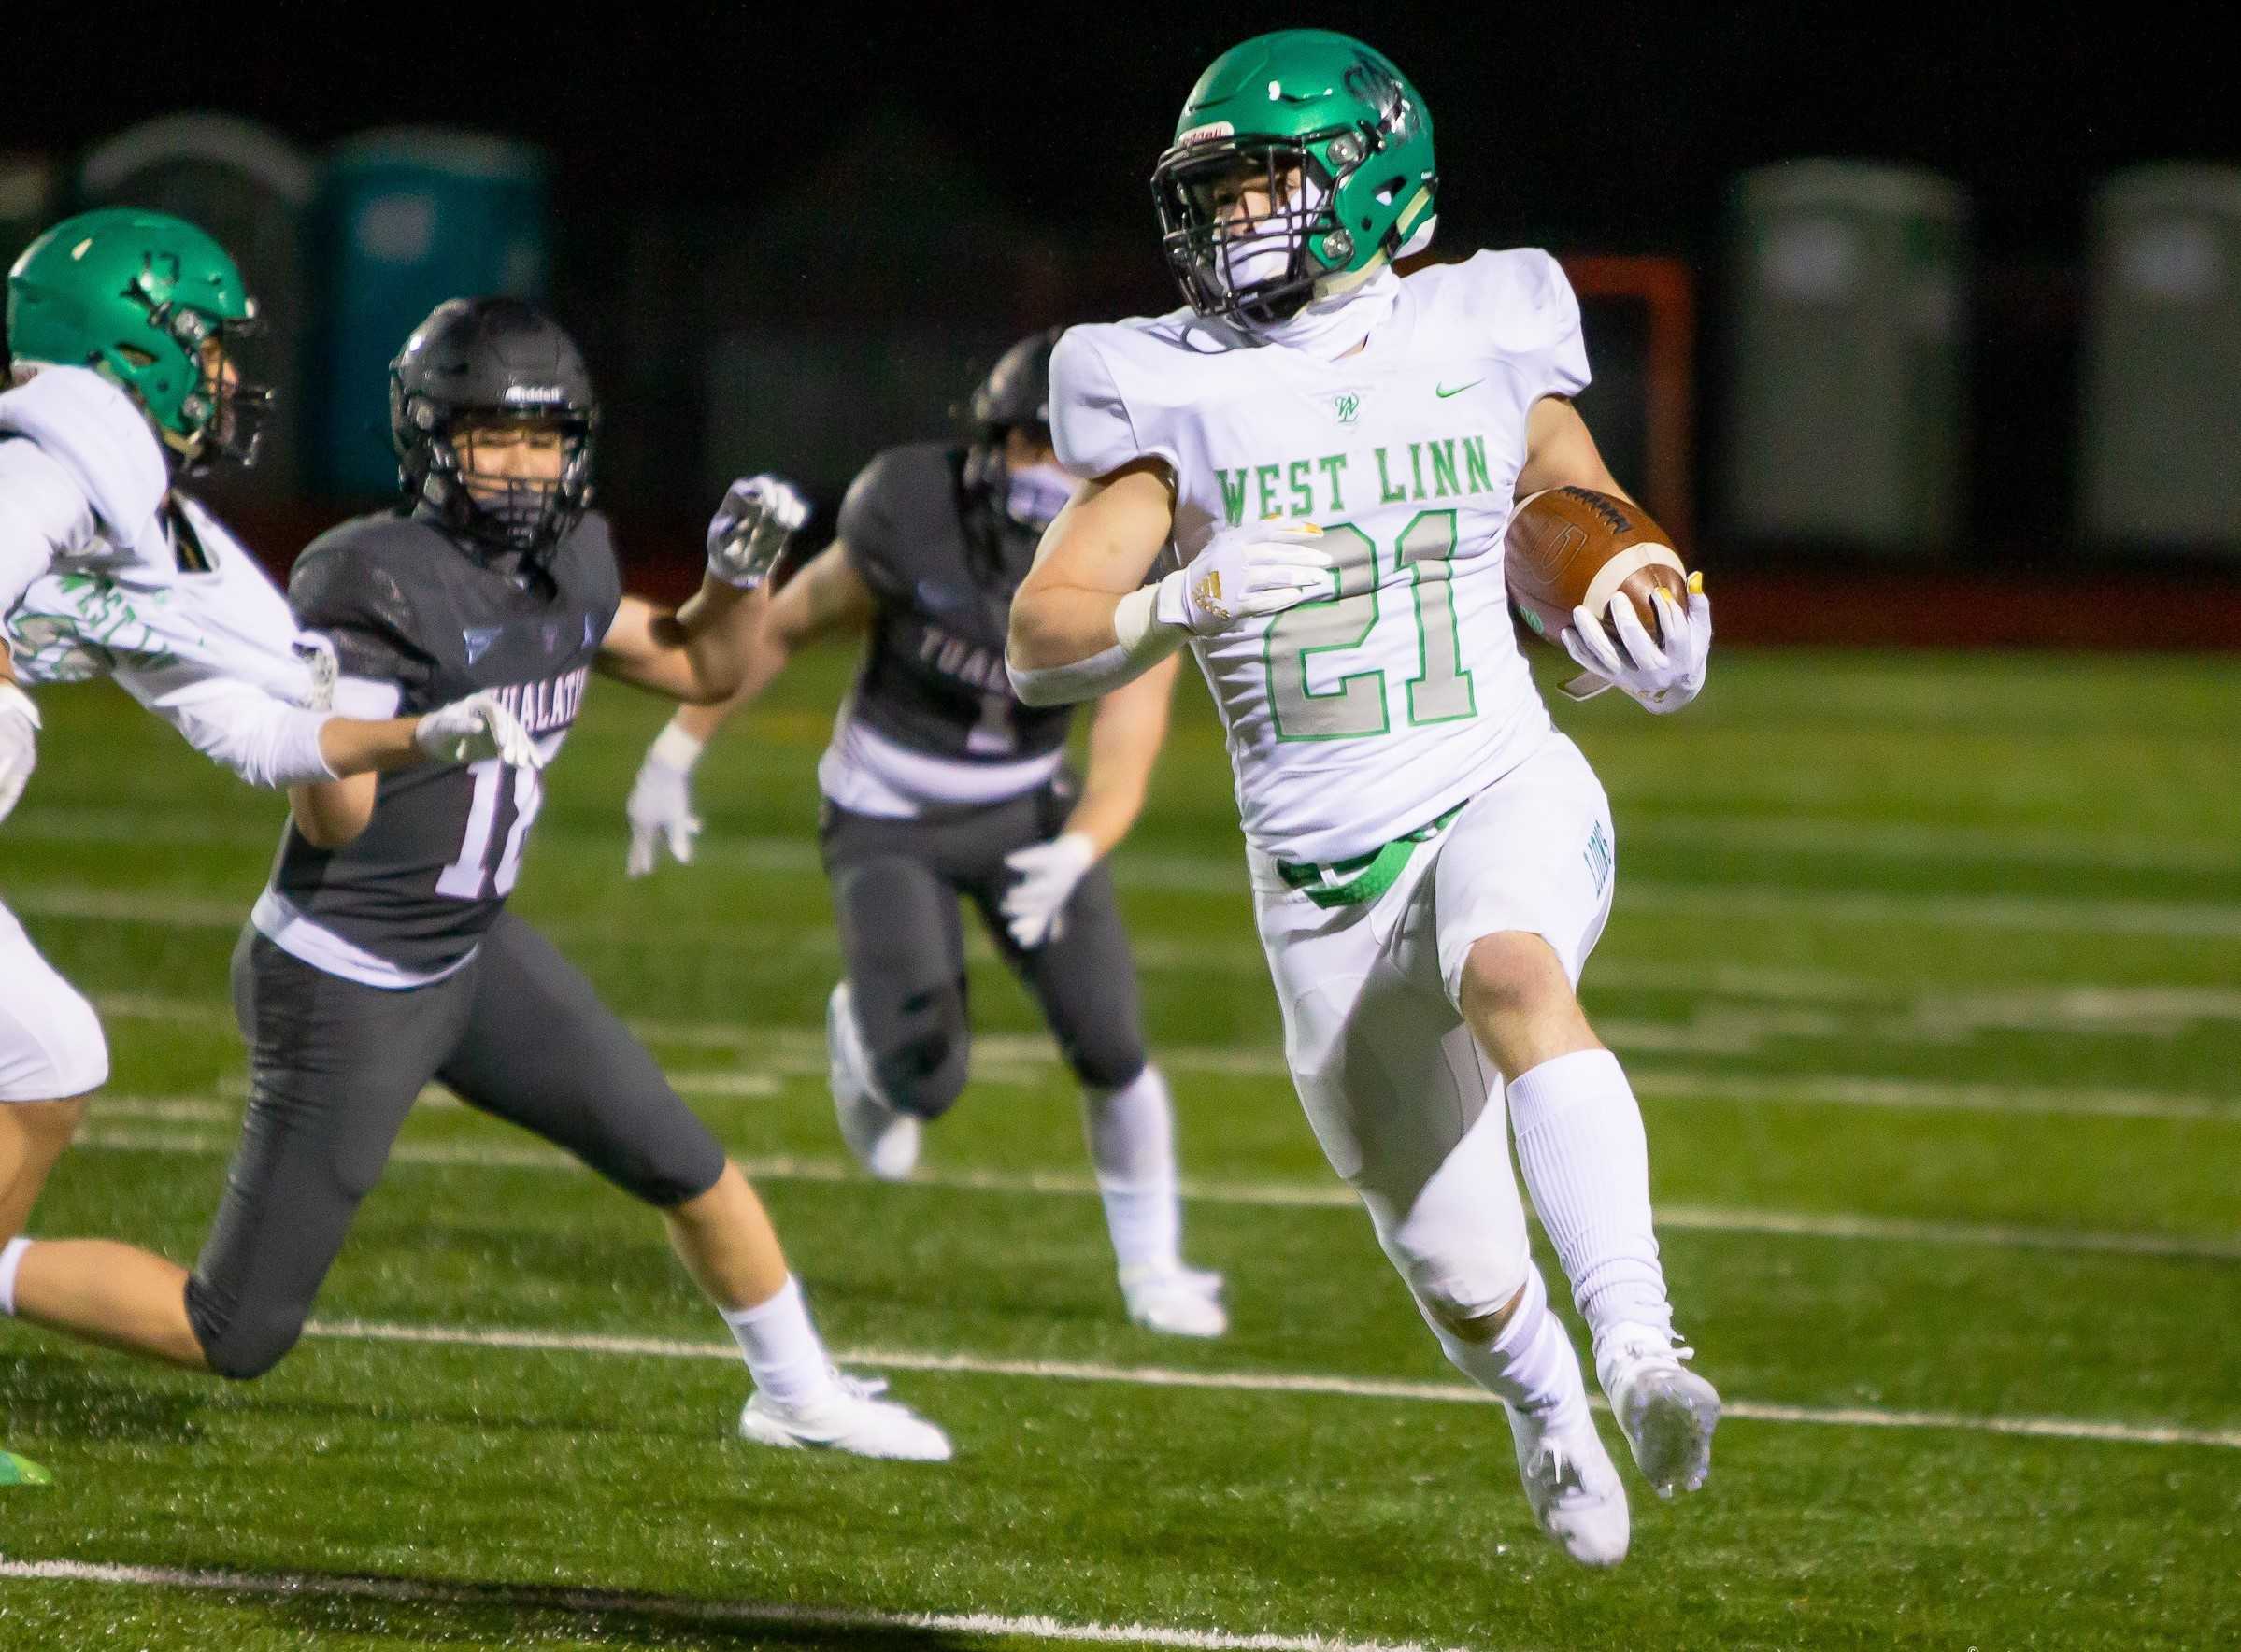 West Linn's Gavin Haines, who plans to walk on at Oregon State, has rushed for six touchdowns. (Photo by Brad Cantor)